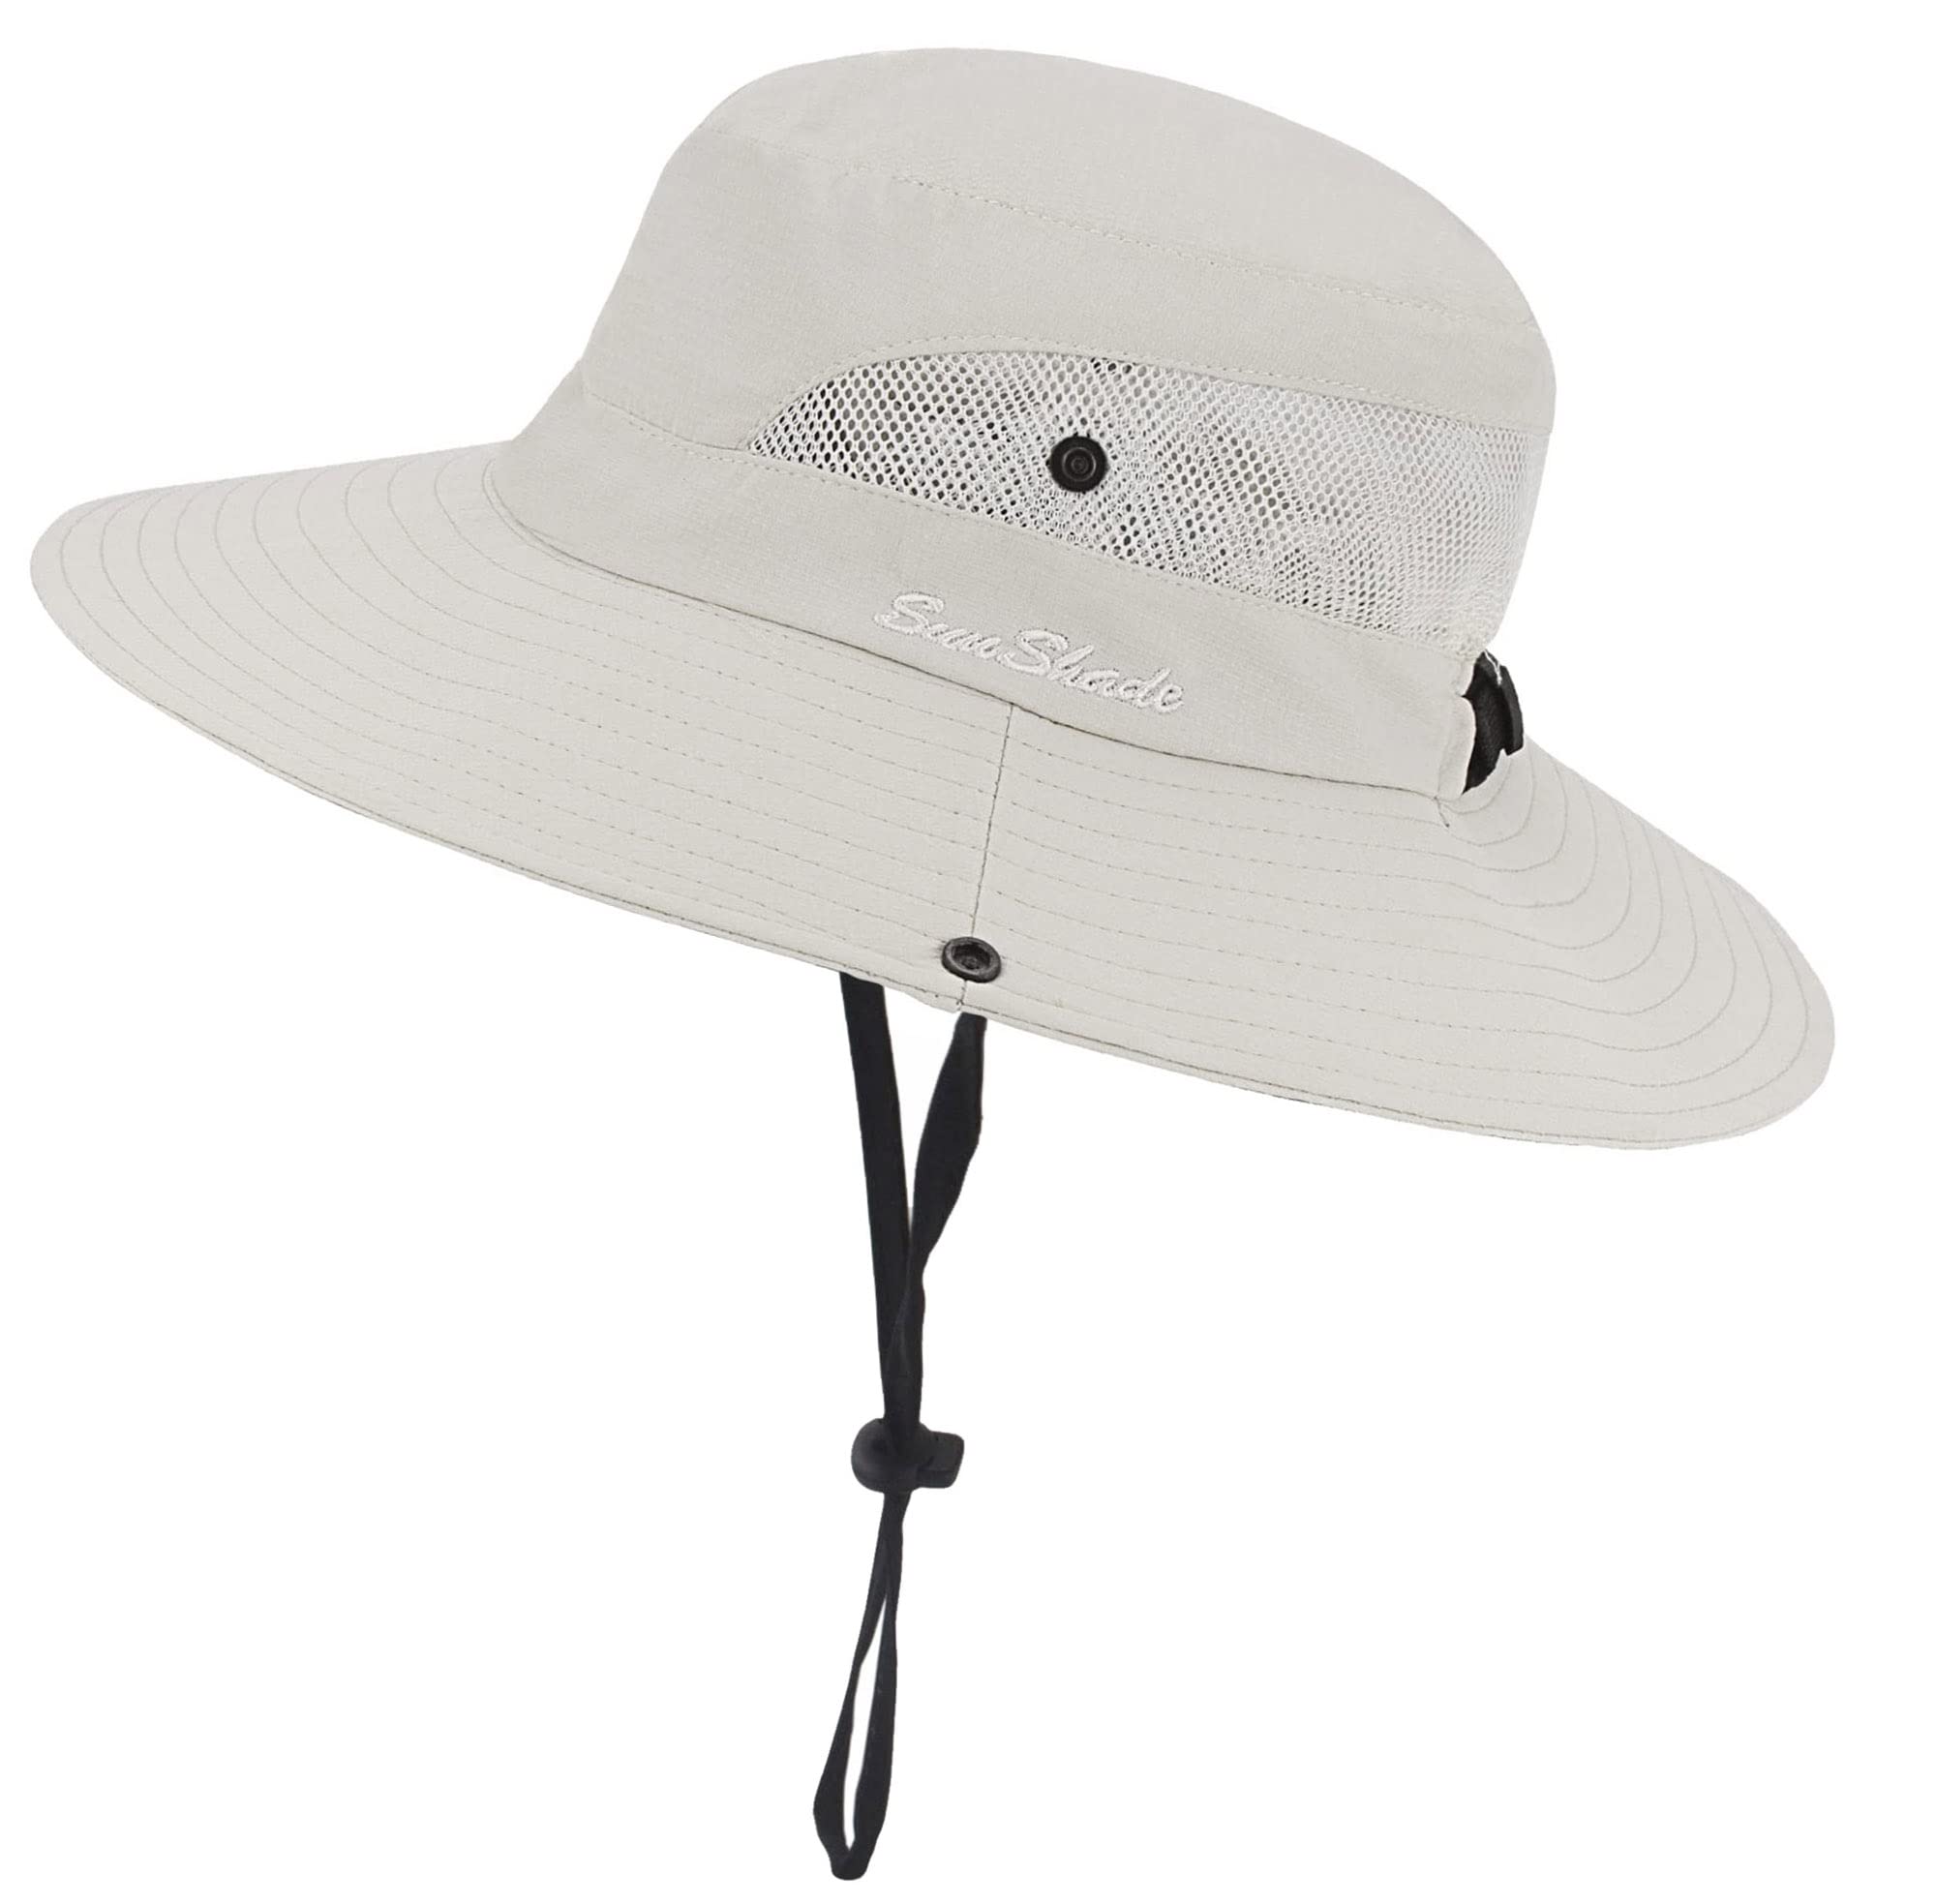 Womens Summer Sun-Hat Outdoor UV Protection Fishing Hat Wide Brim